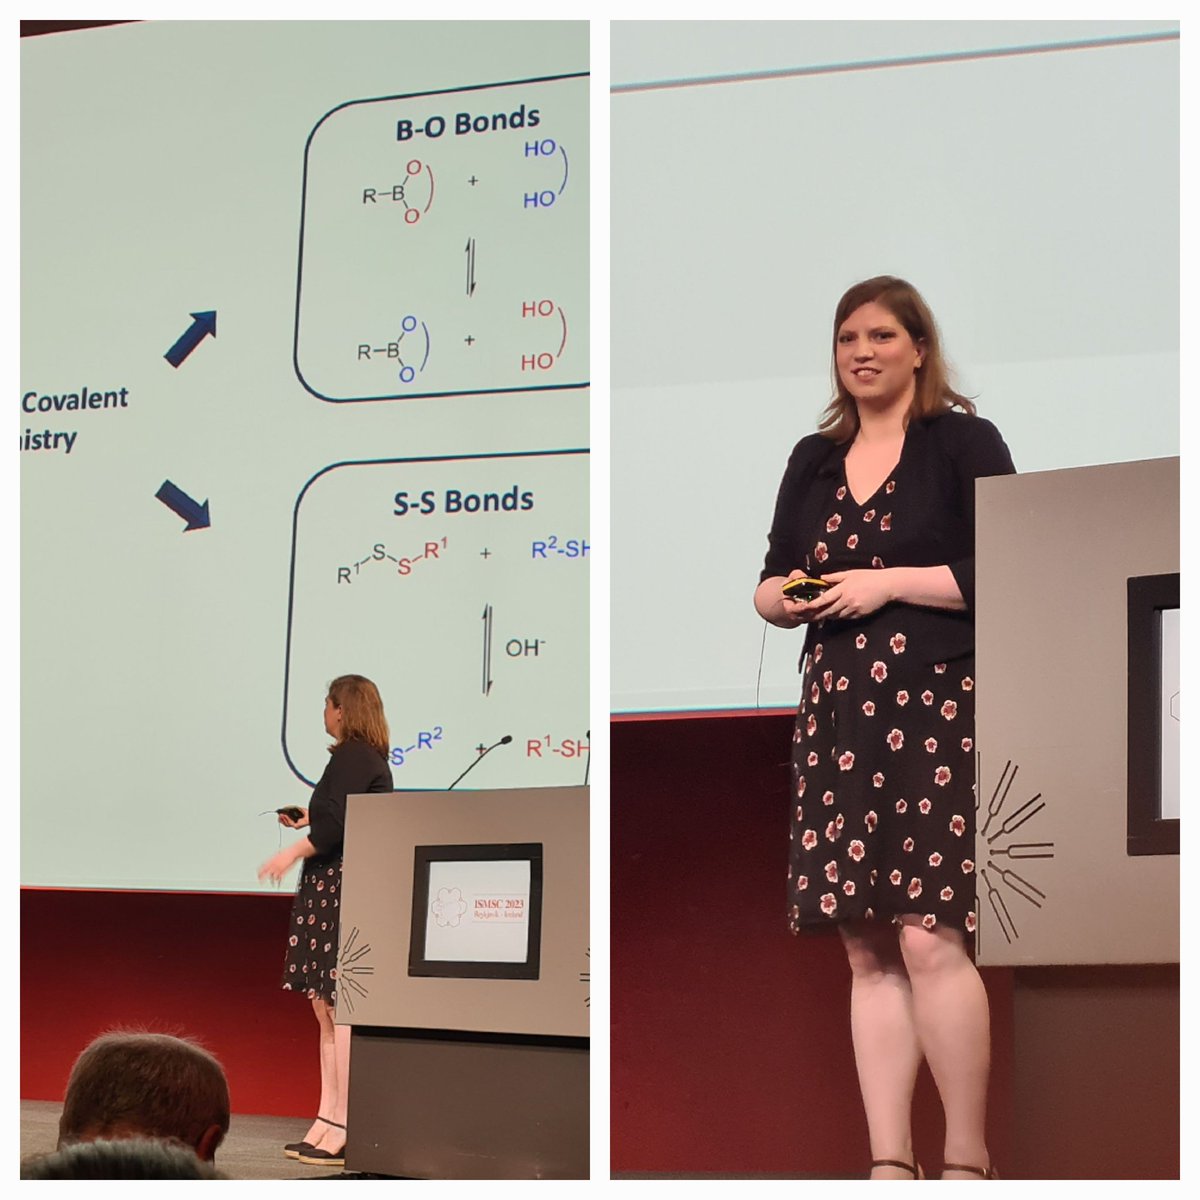 Congratulations on the new publications @annajmcconnell, great to see the unveiling @ISMSC2023 😁